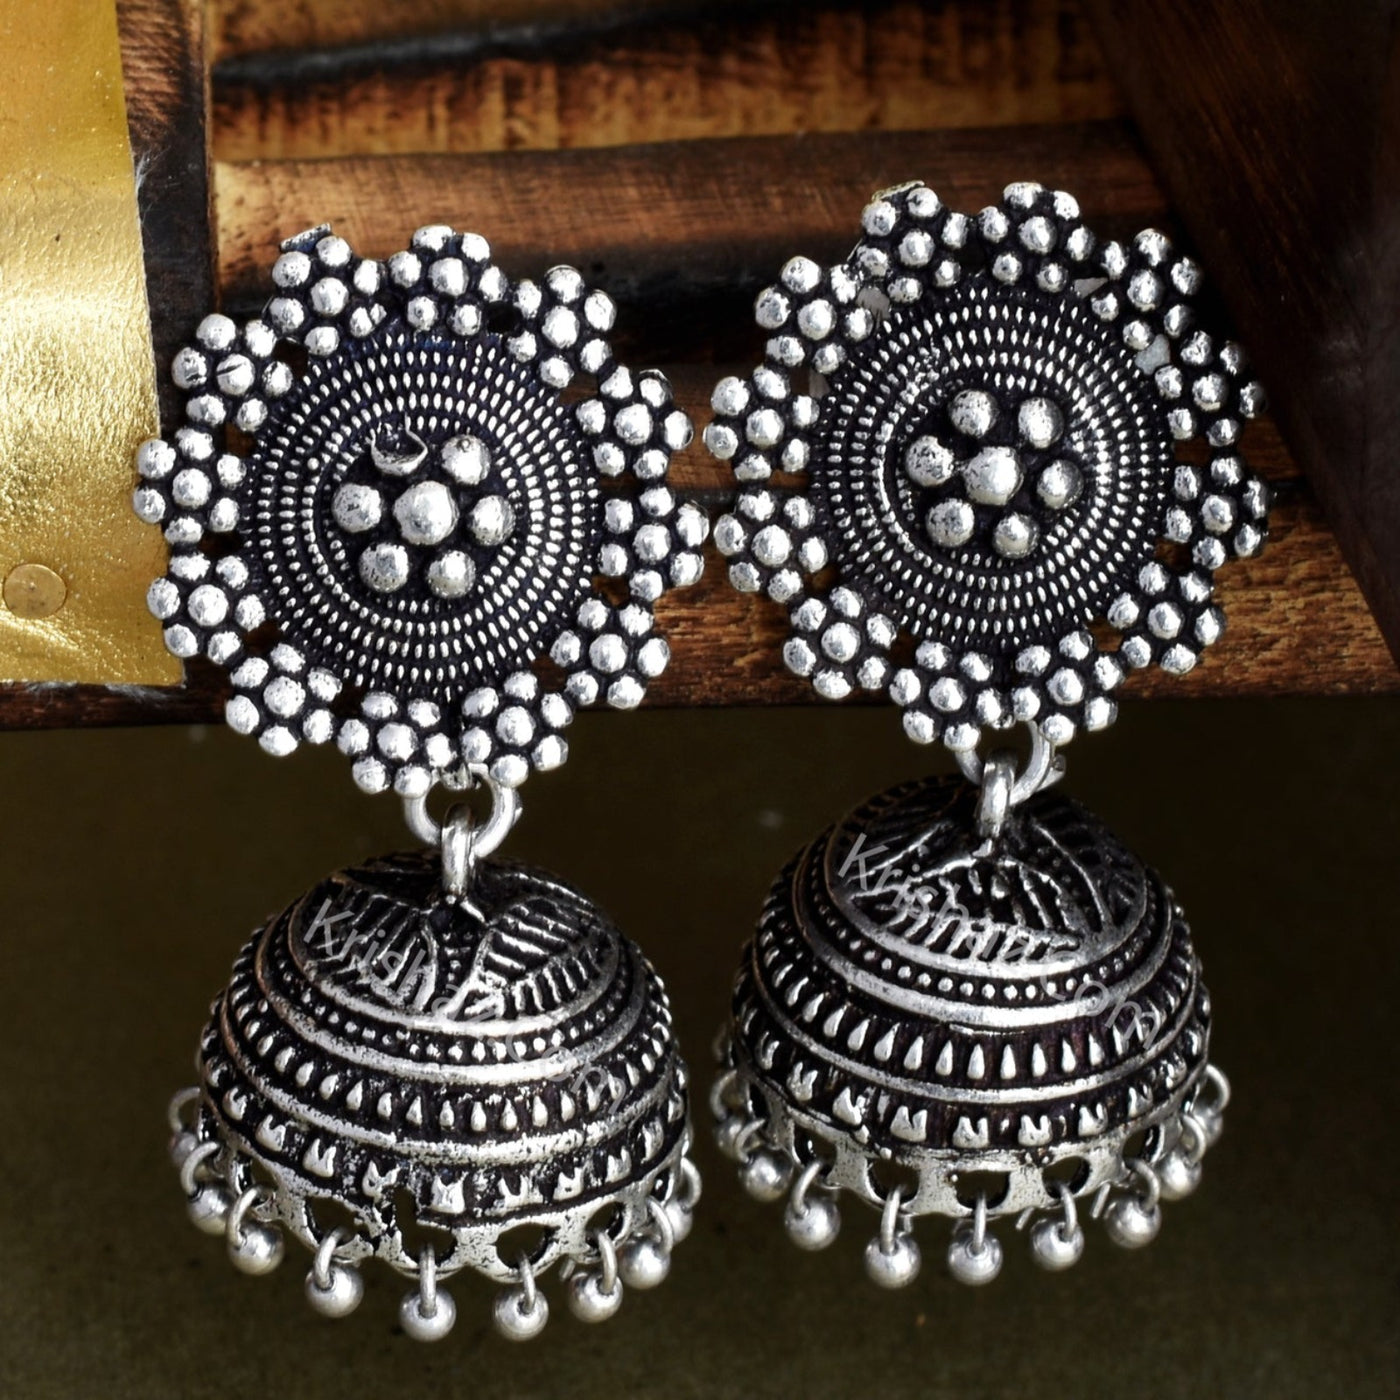 Shenaz Set of Oxidized Silver Choker +Matching Earrings +Nose Ring +Toe Rings +One Ring